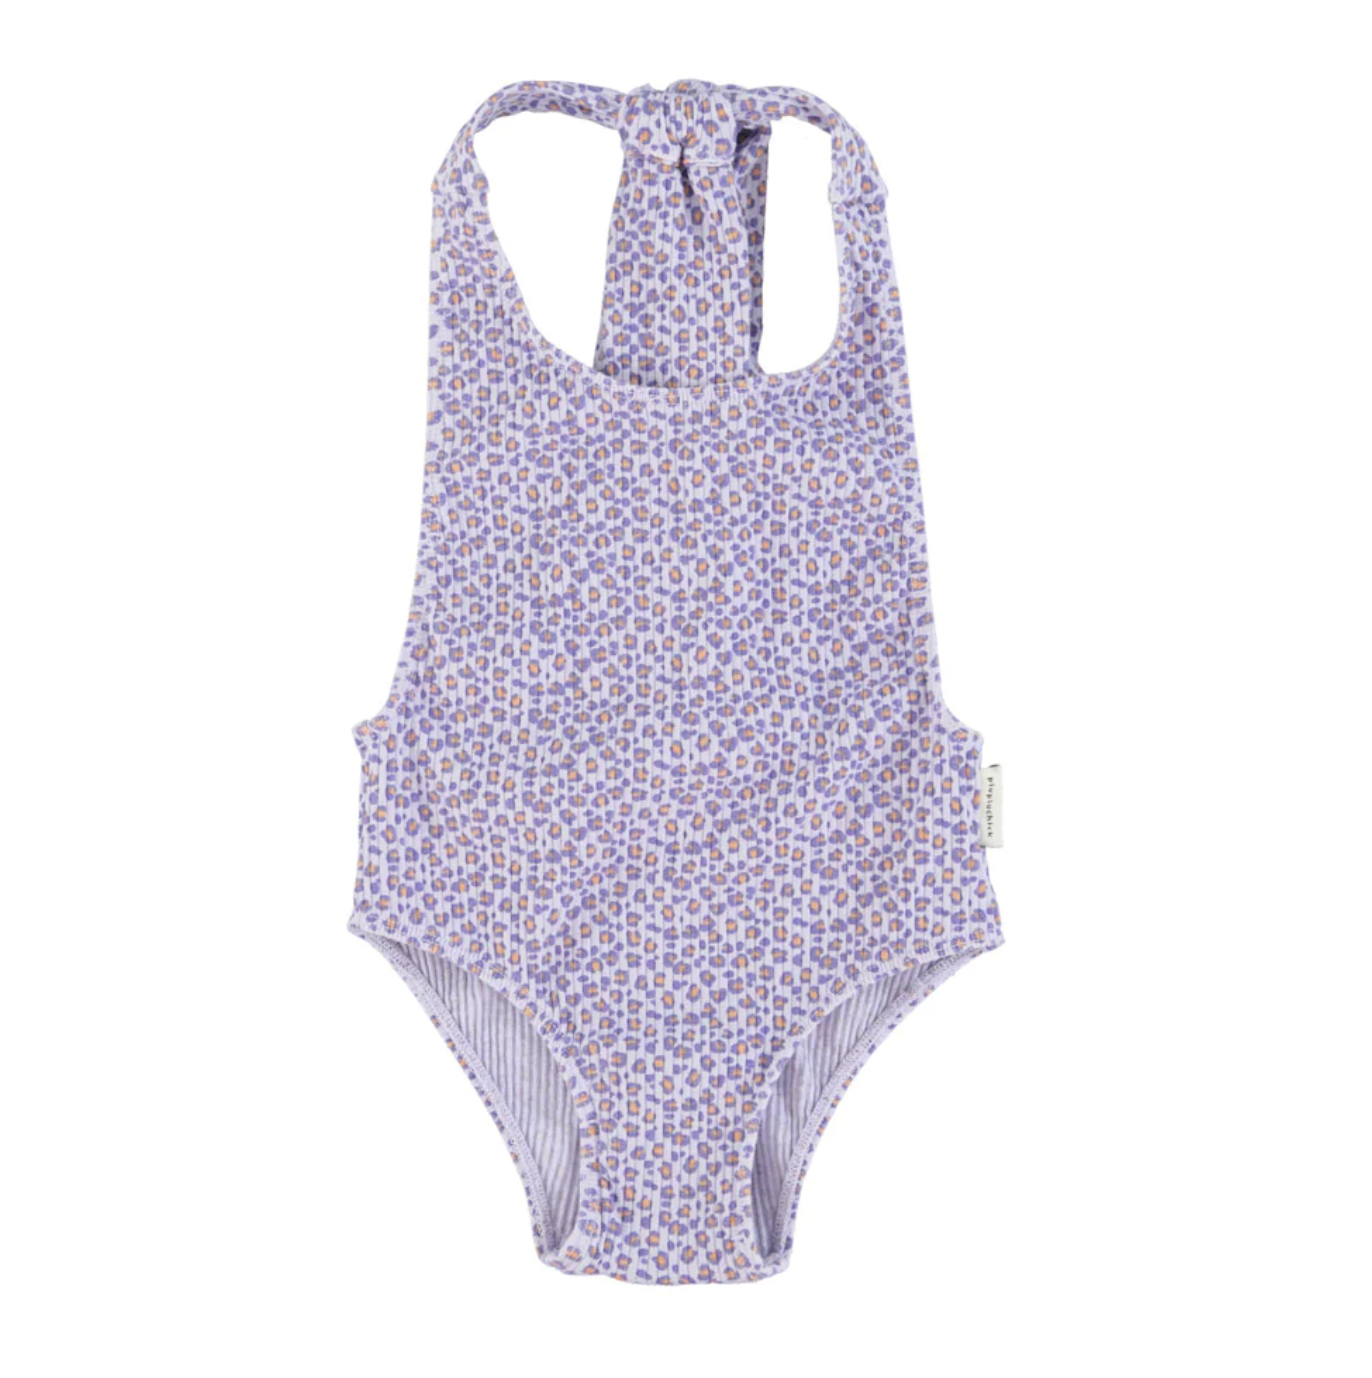 Swimsuit - Bow back, lavender with animal print